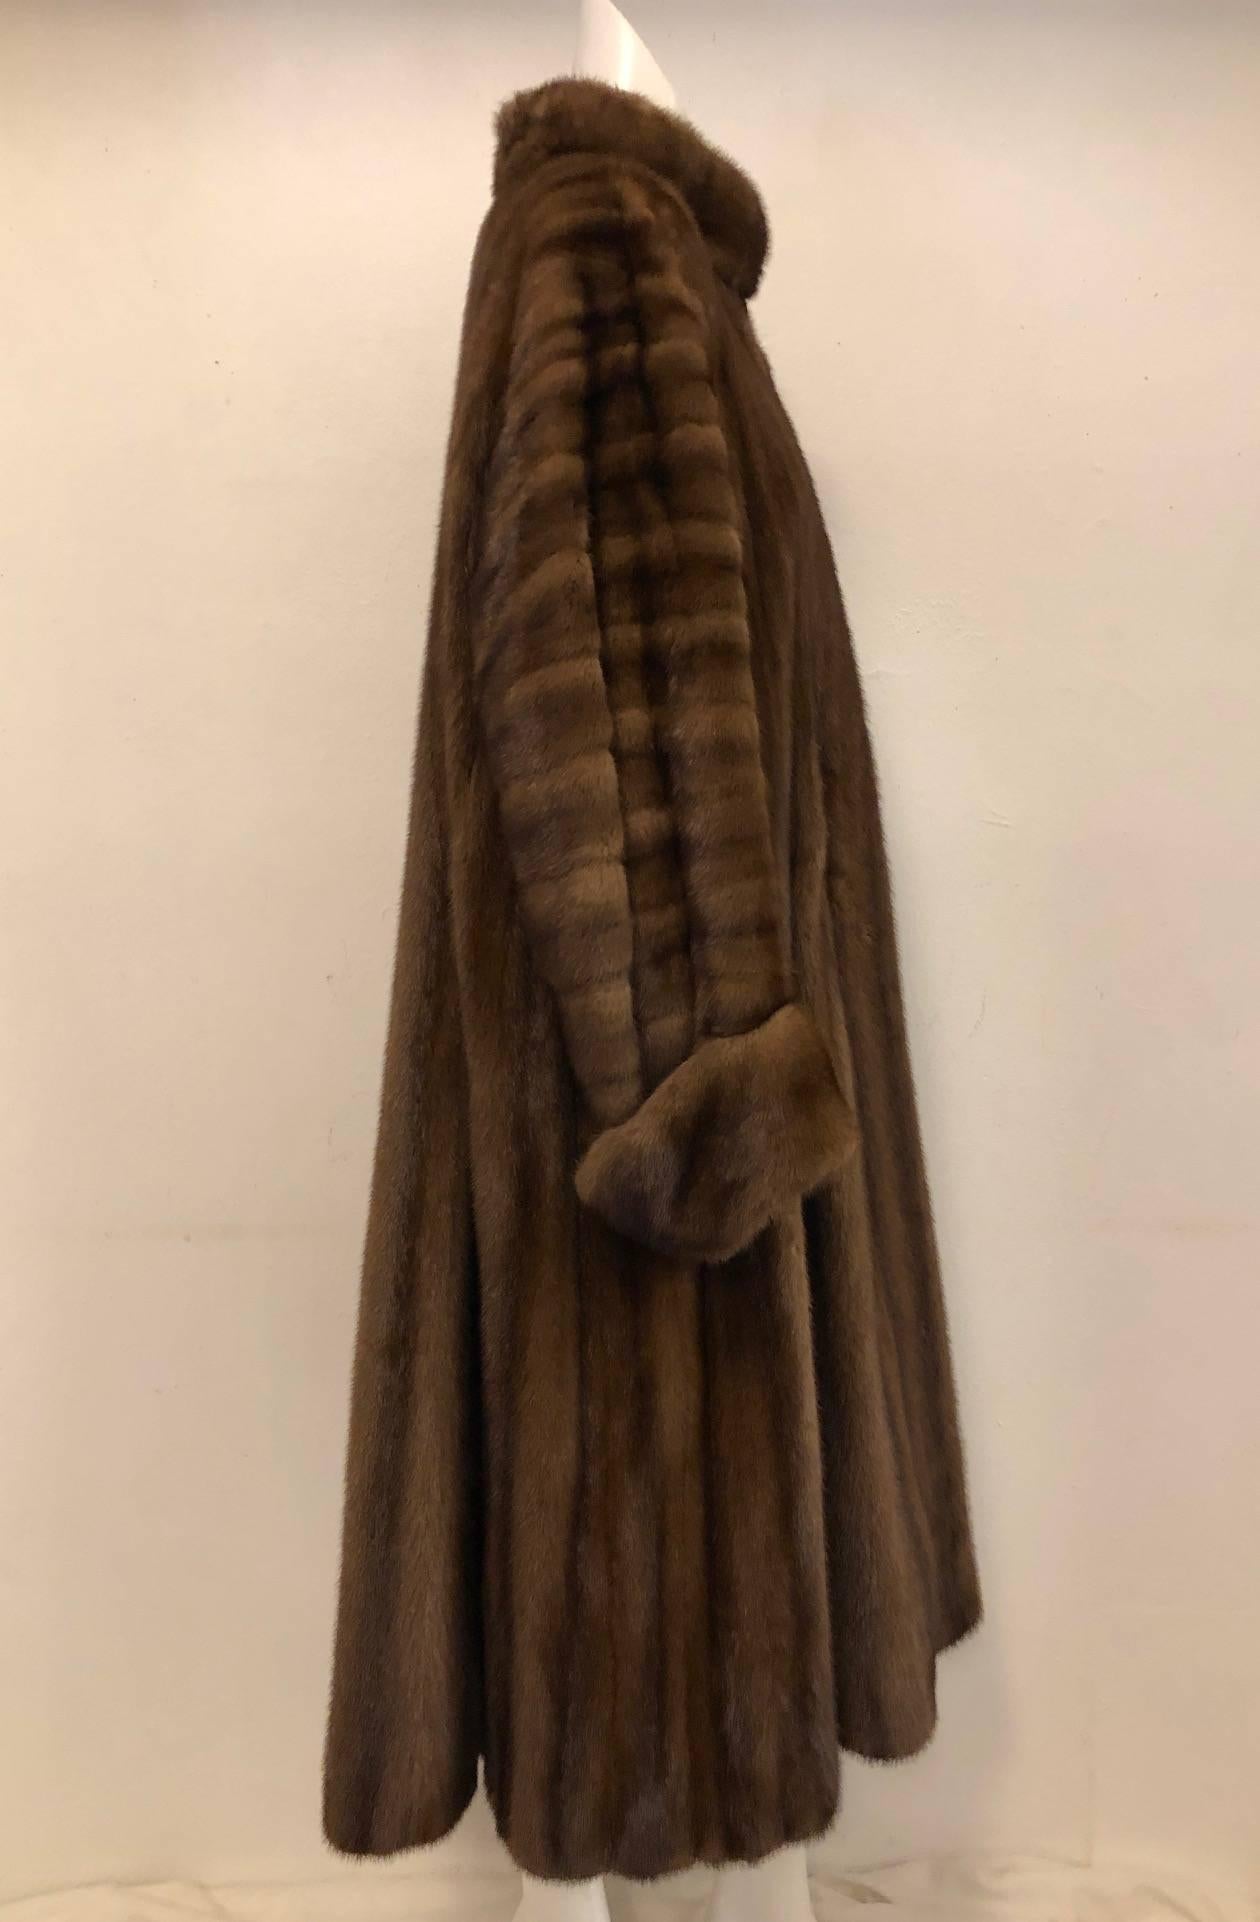 Befitting the King of Fashion's legendary status, this magnificent brown ranch mink swing coat is one for the archives!  This Yves Saint Laurent Fourrure features ultra-luxurious pelts, standup collar, two on seam pockets, and 4" deep cuffs.  